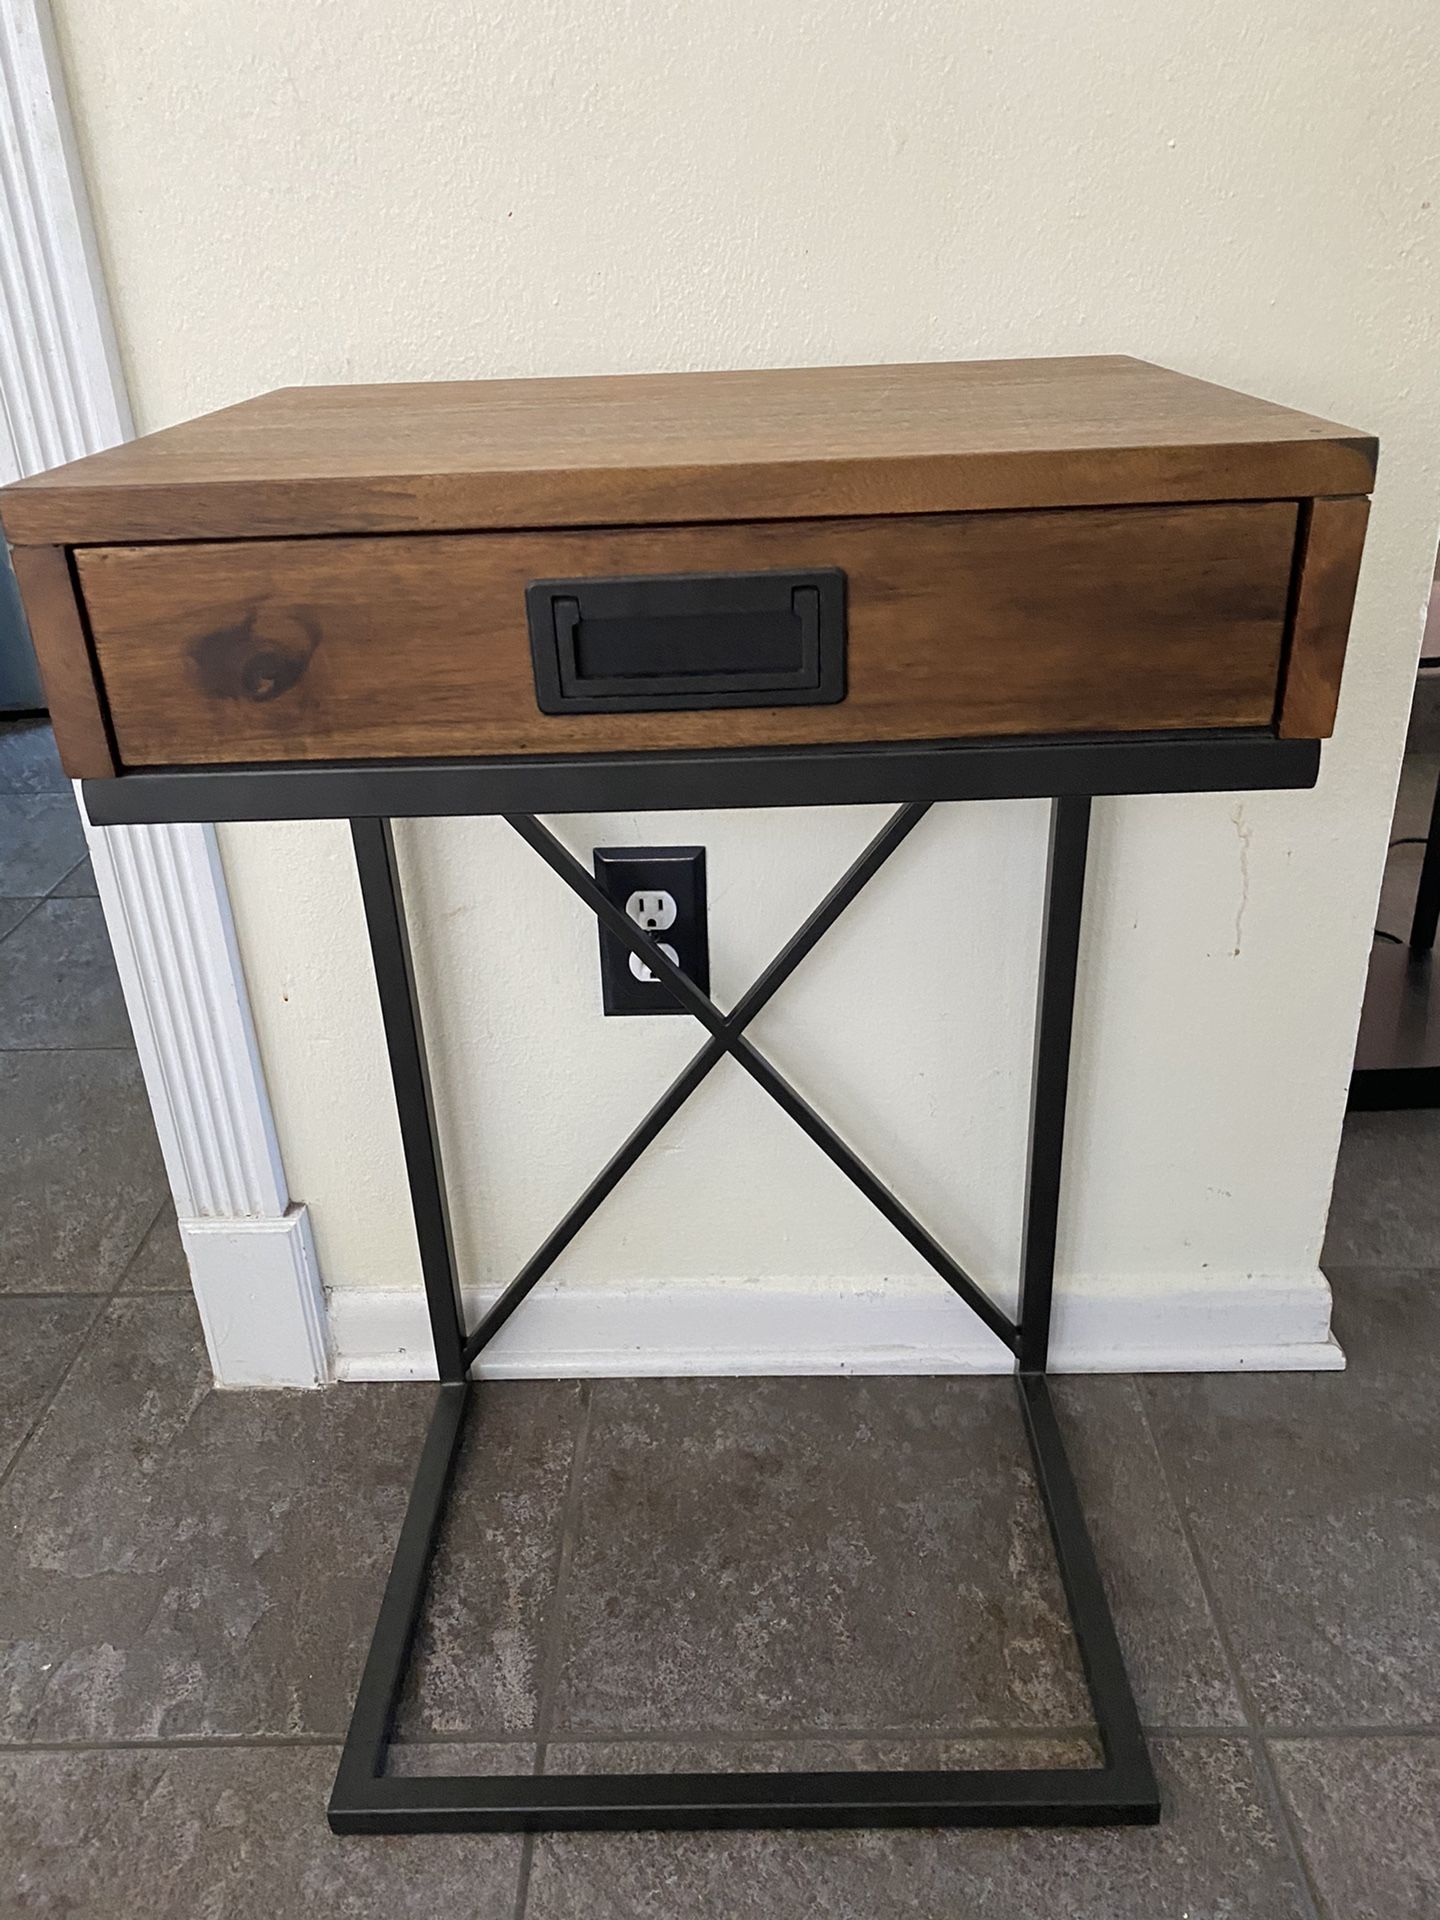 Pier one side table/ nightstand